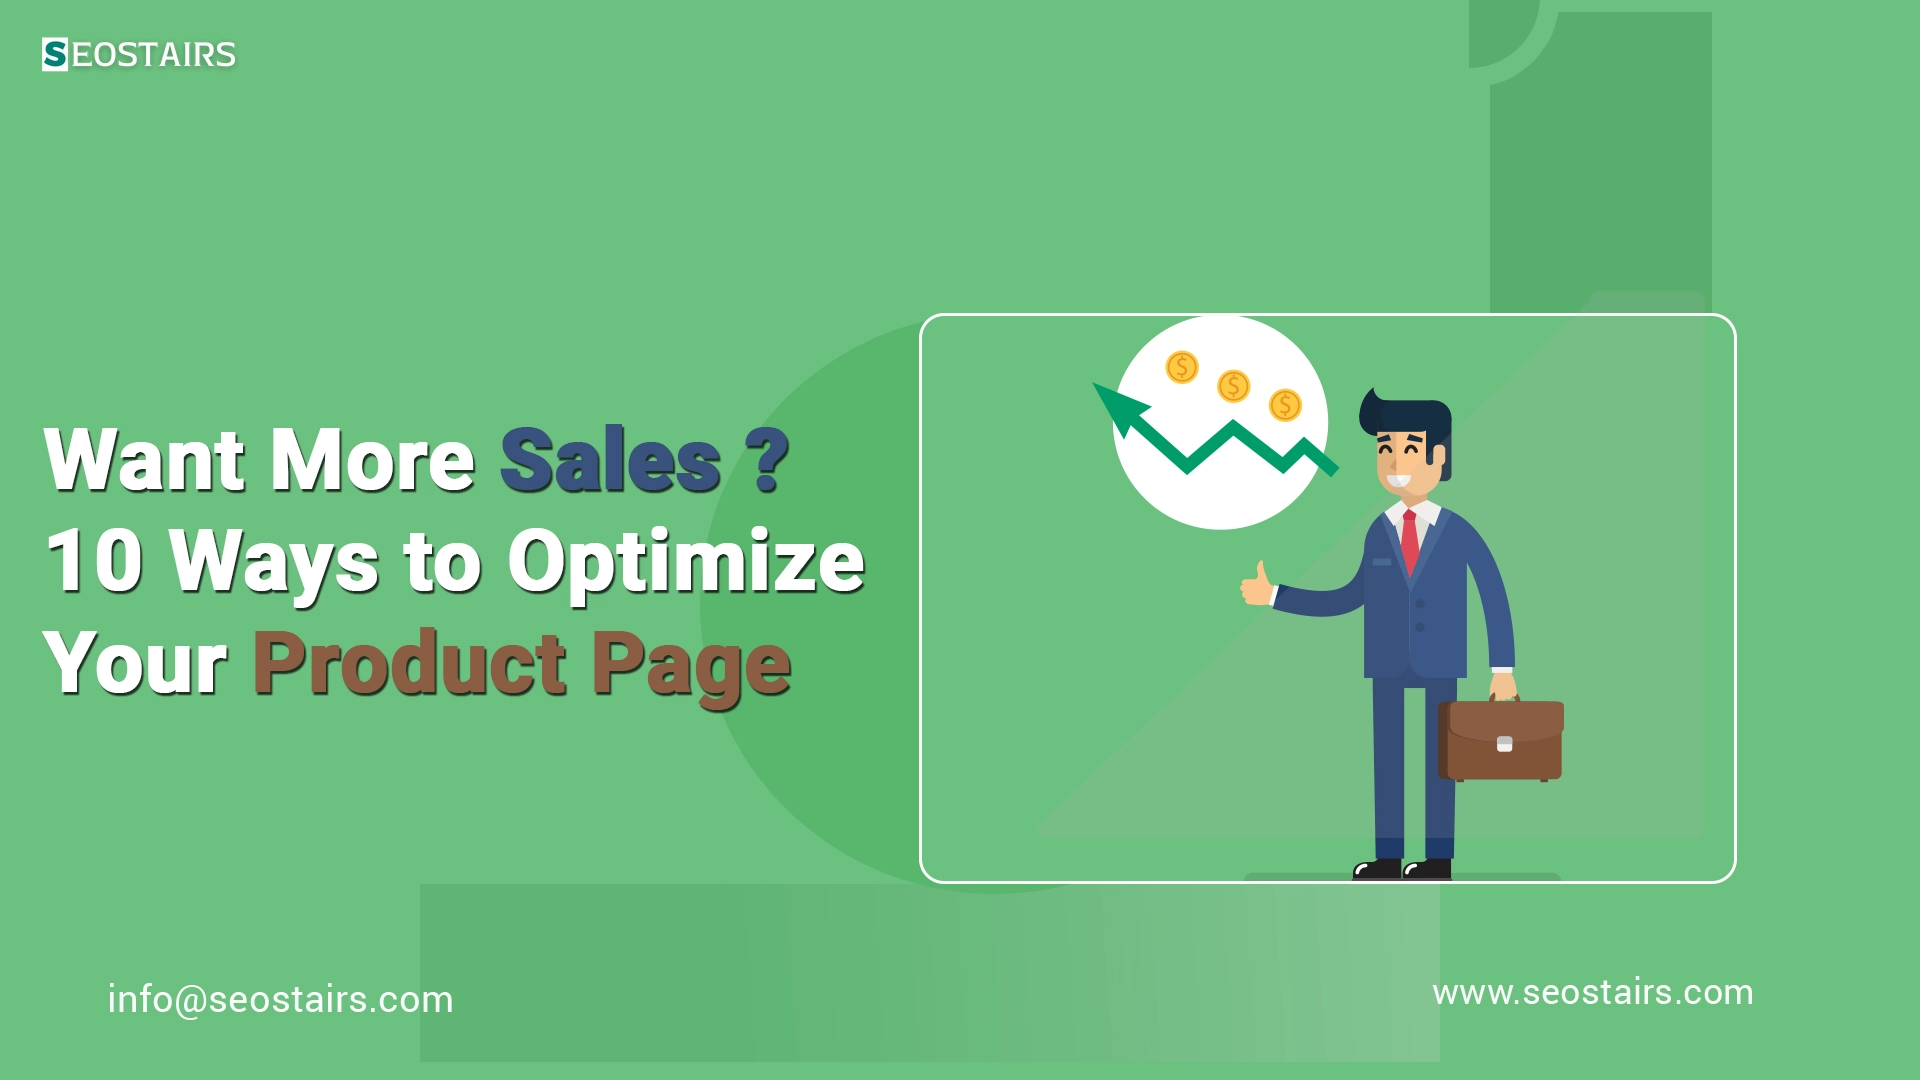 Ways to optimize your product page